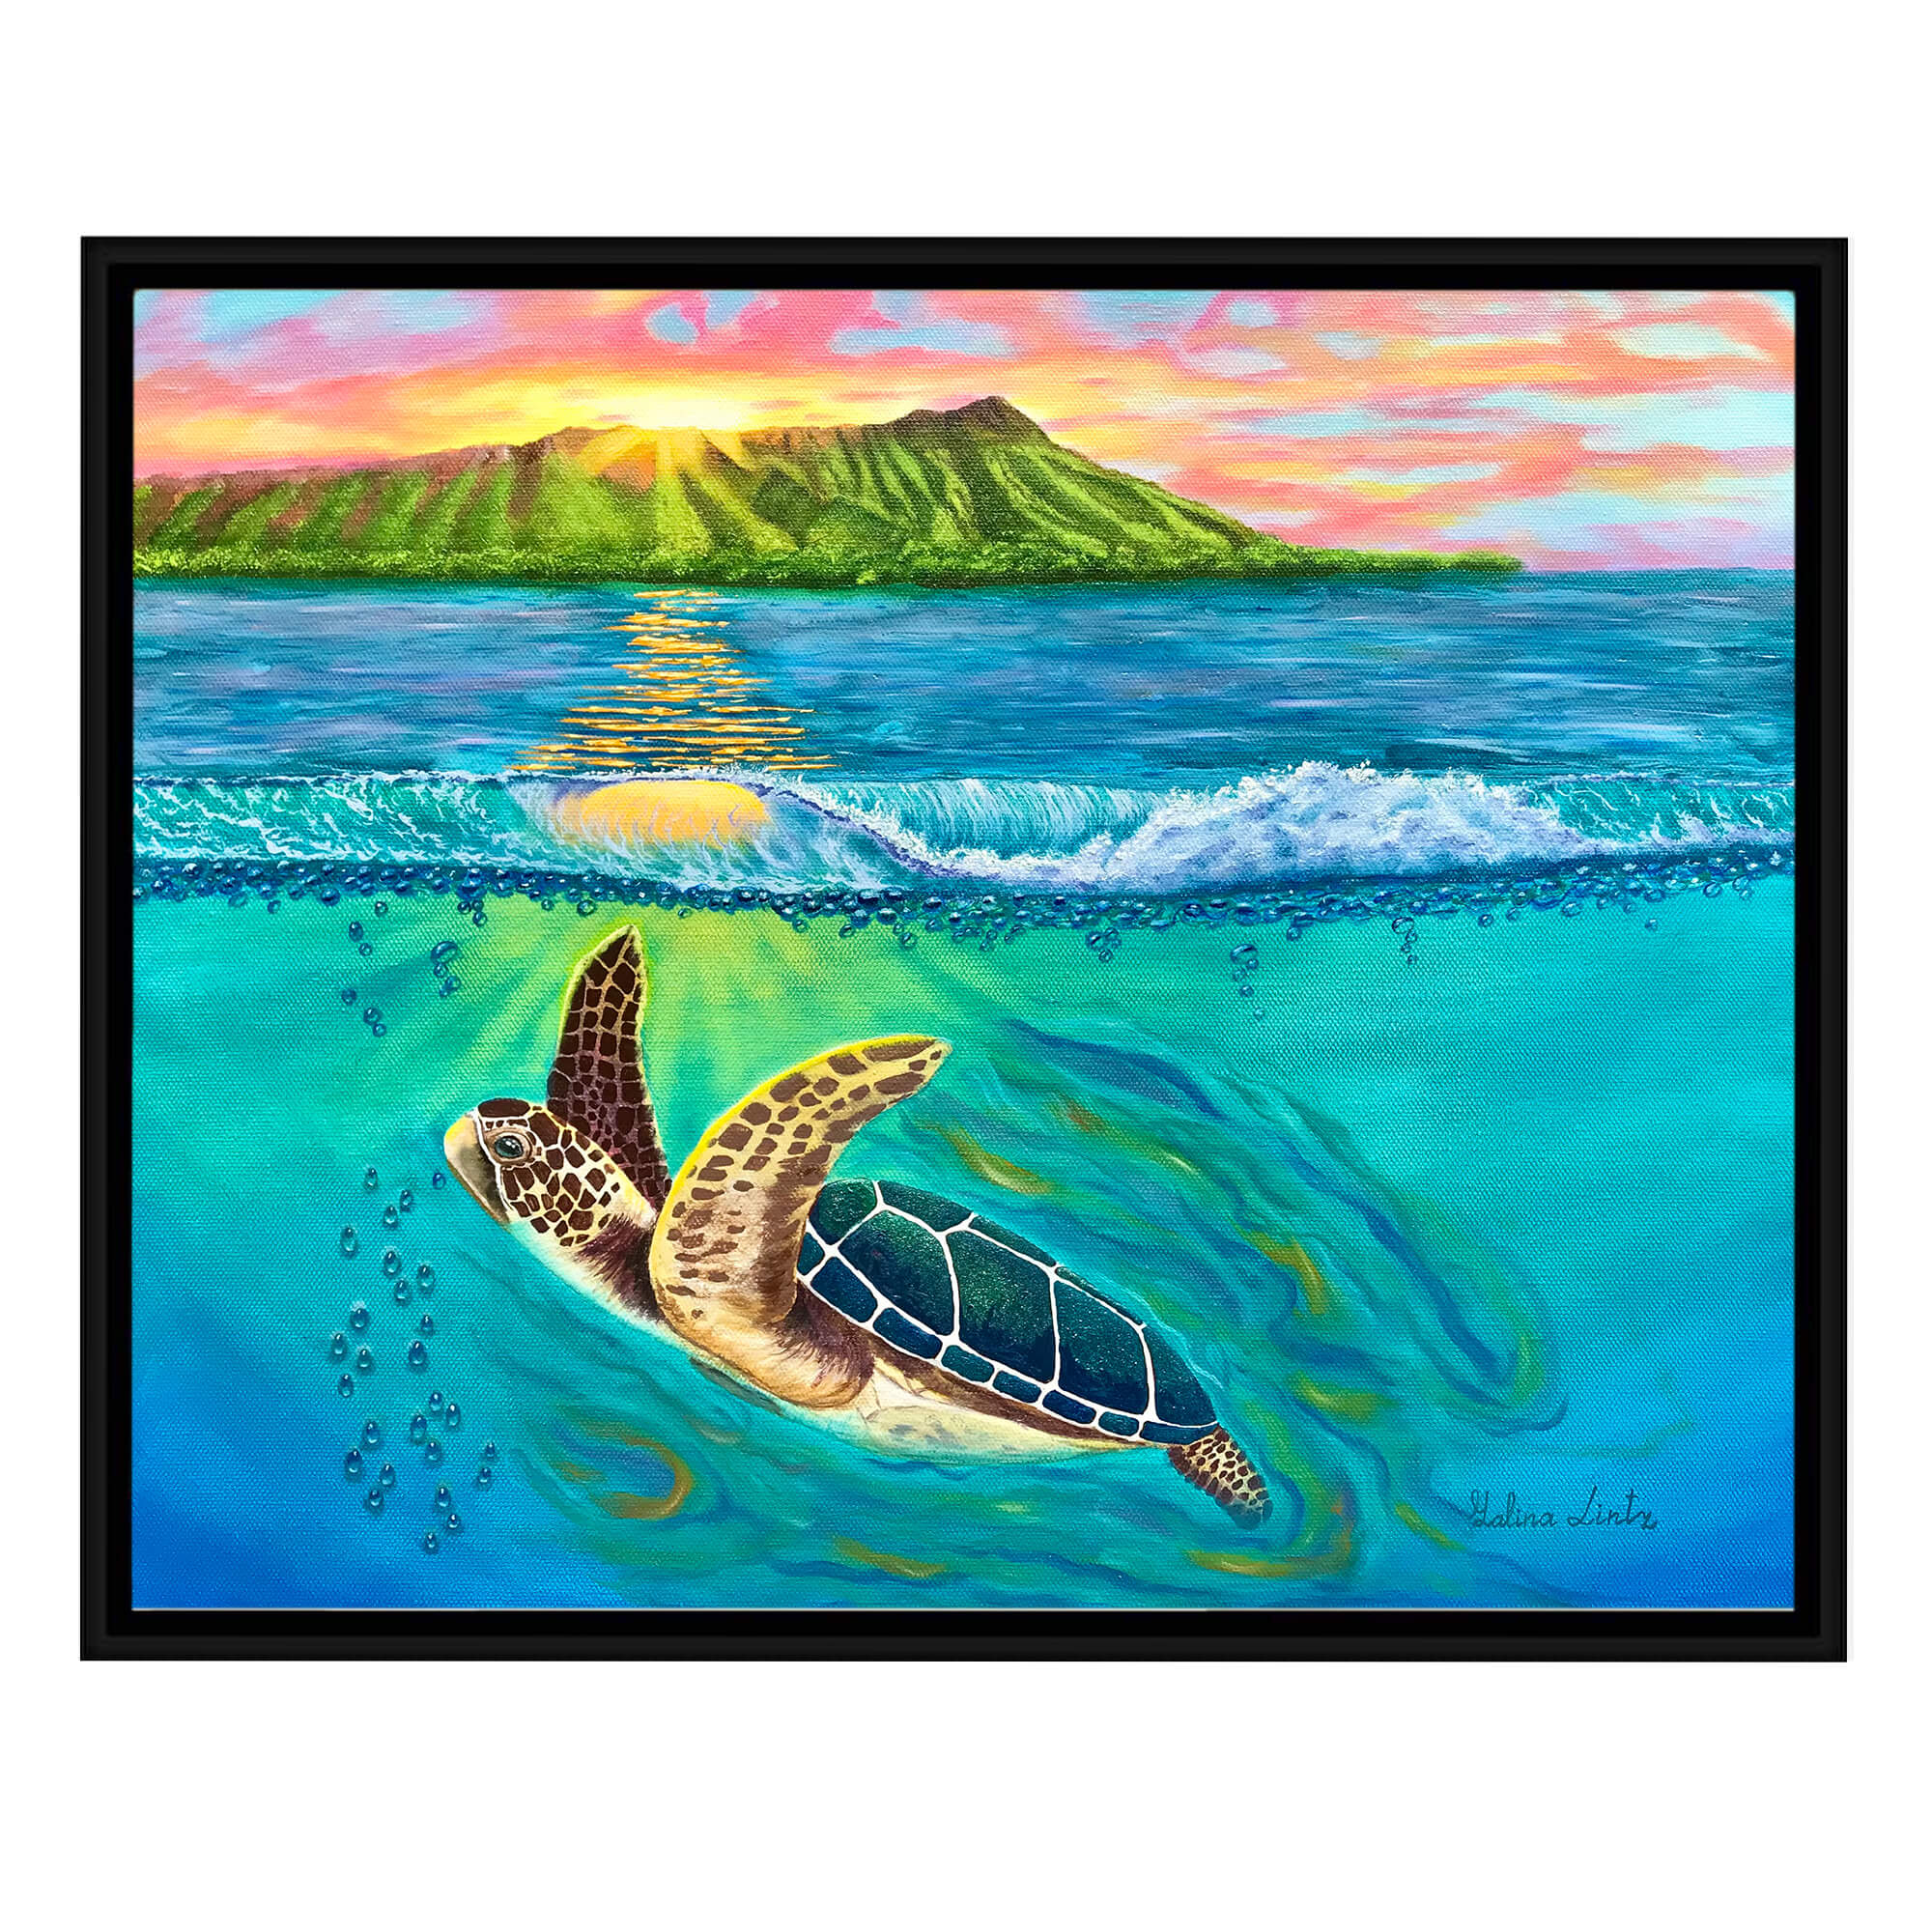 Canvas art print featuring a turtle with a blue shell by hawaii artist Galina Lintz